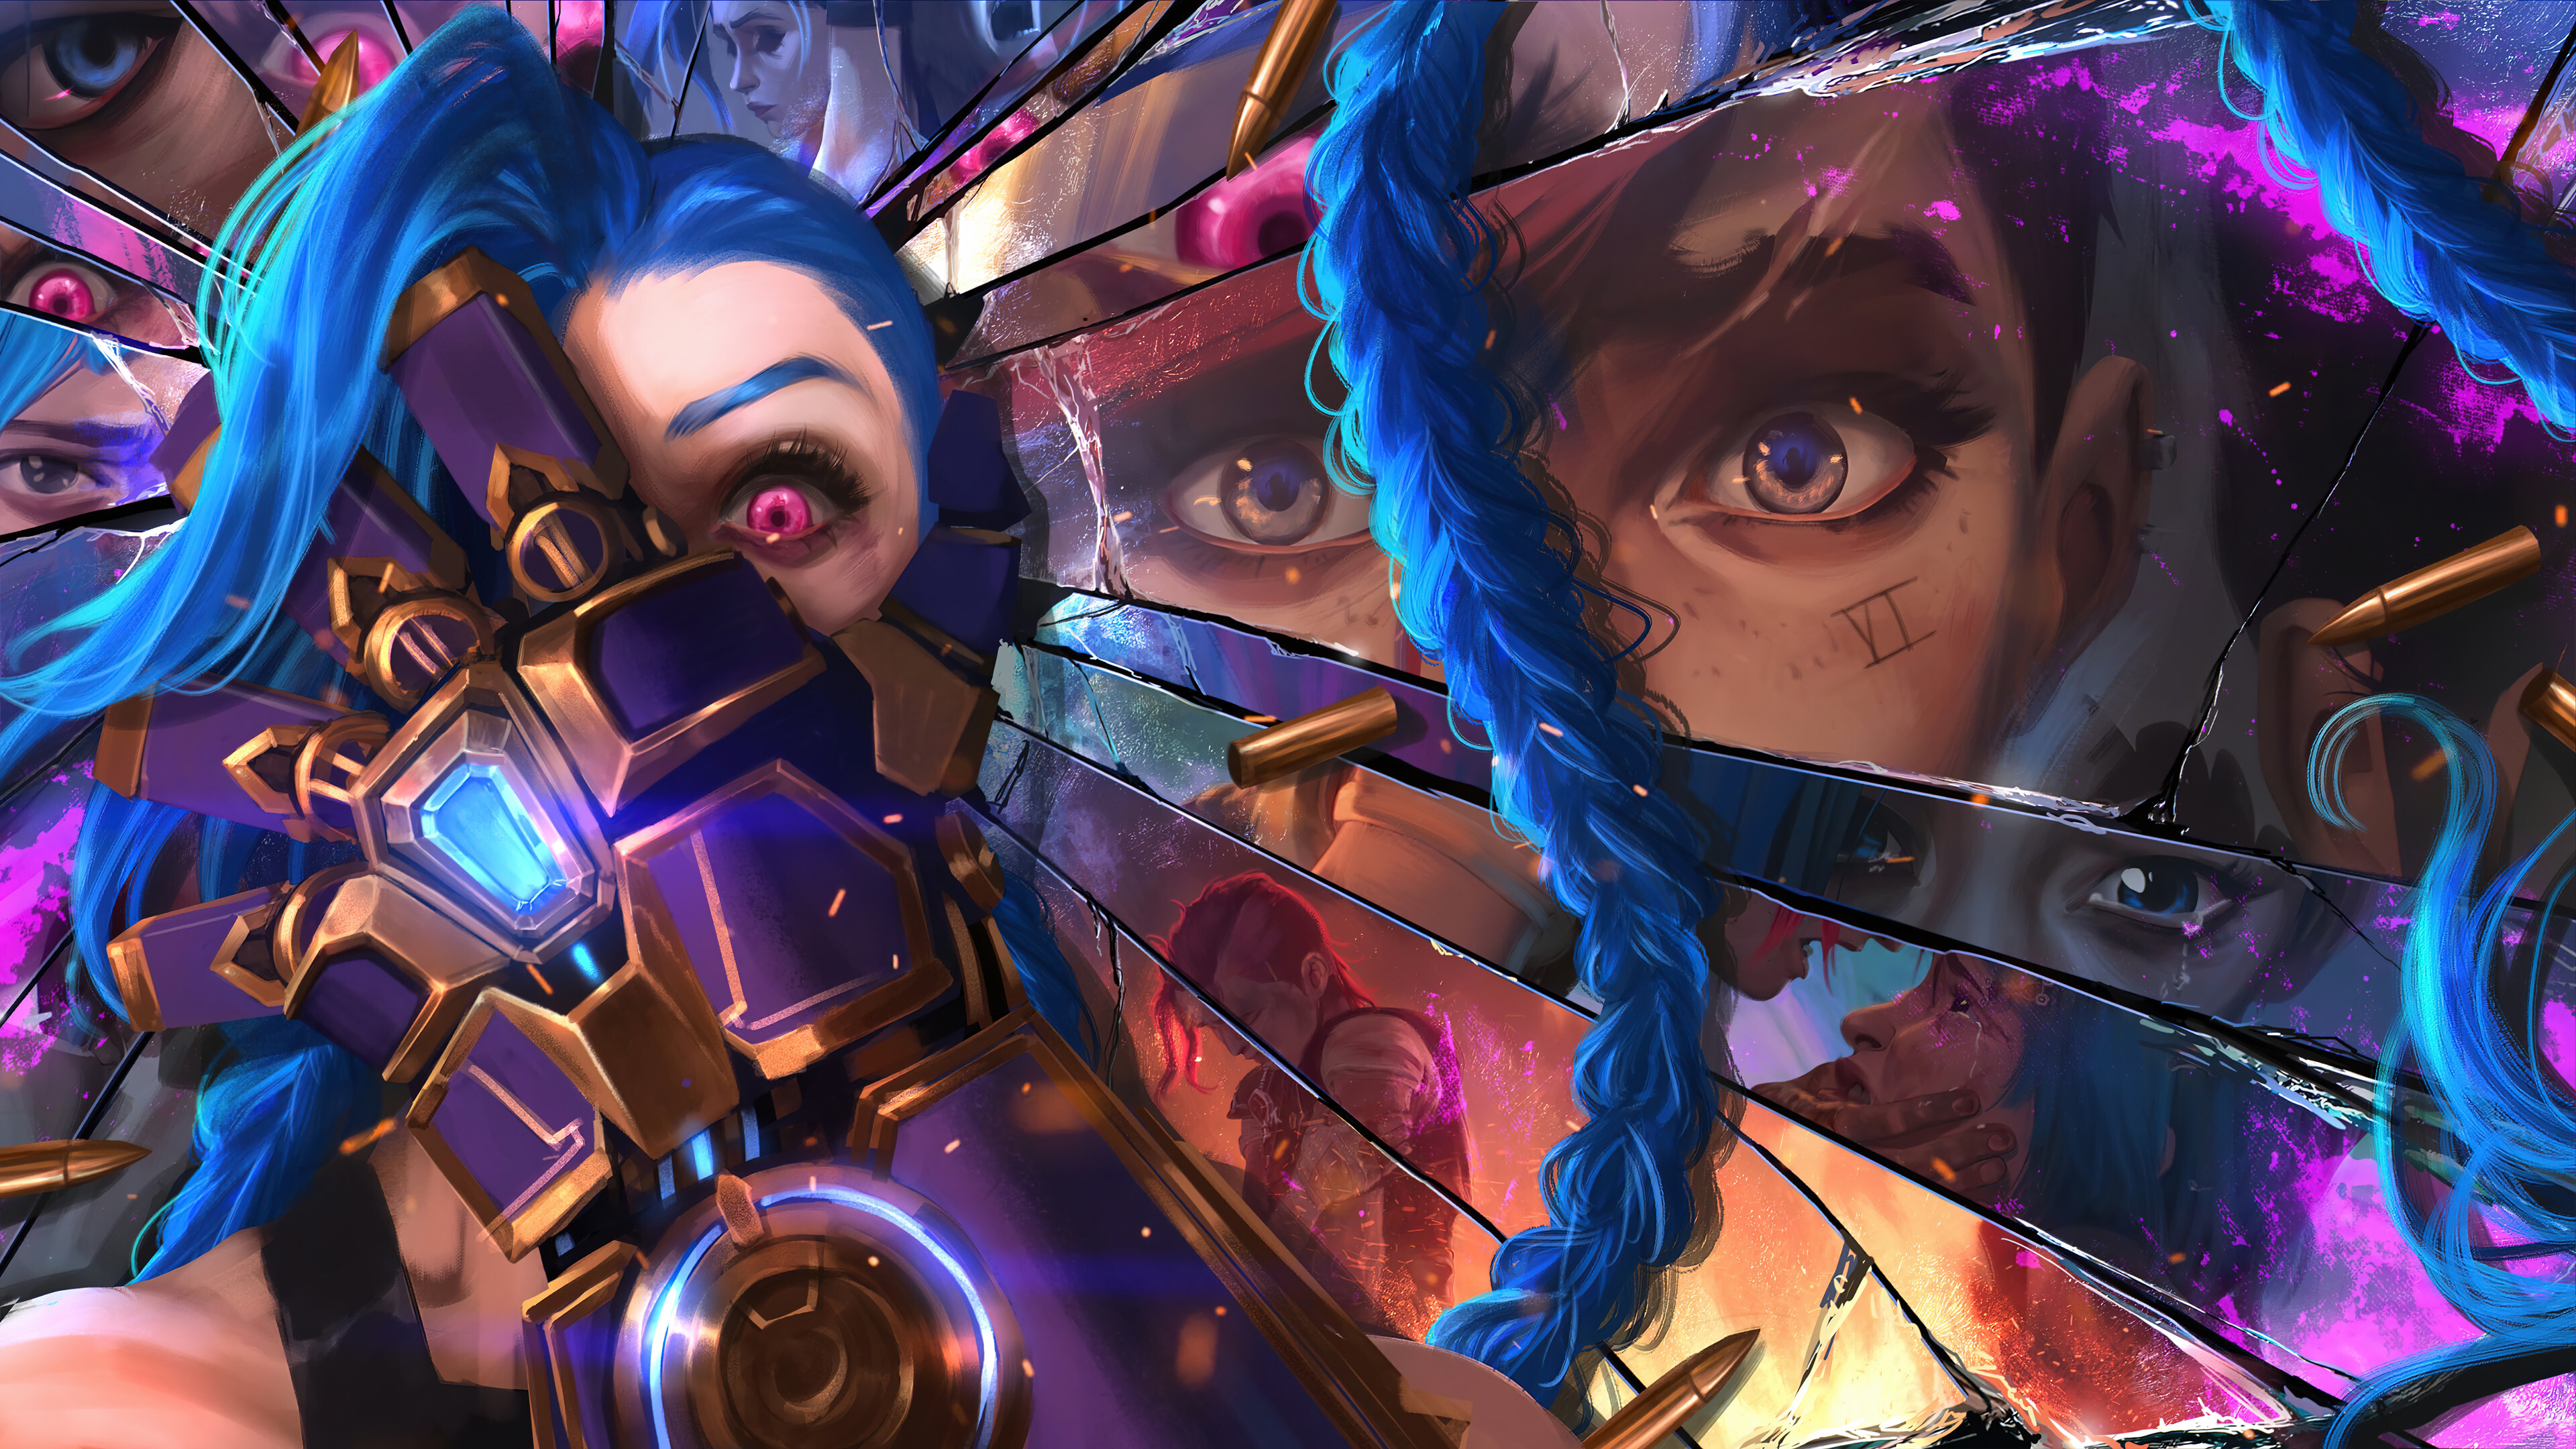 Arcane: League of Legends: Jinx, One of the franchise's most popular and iconic characters. 3840x2160 4K Background.